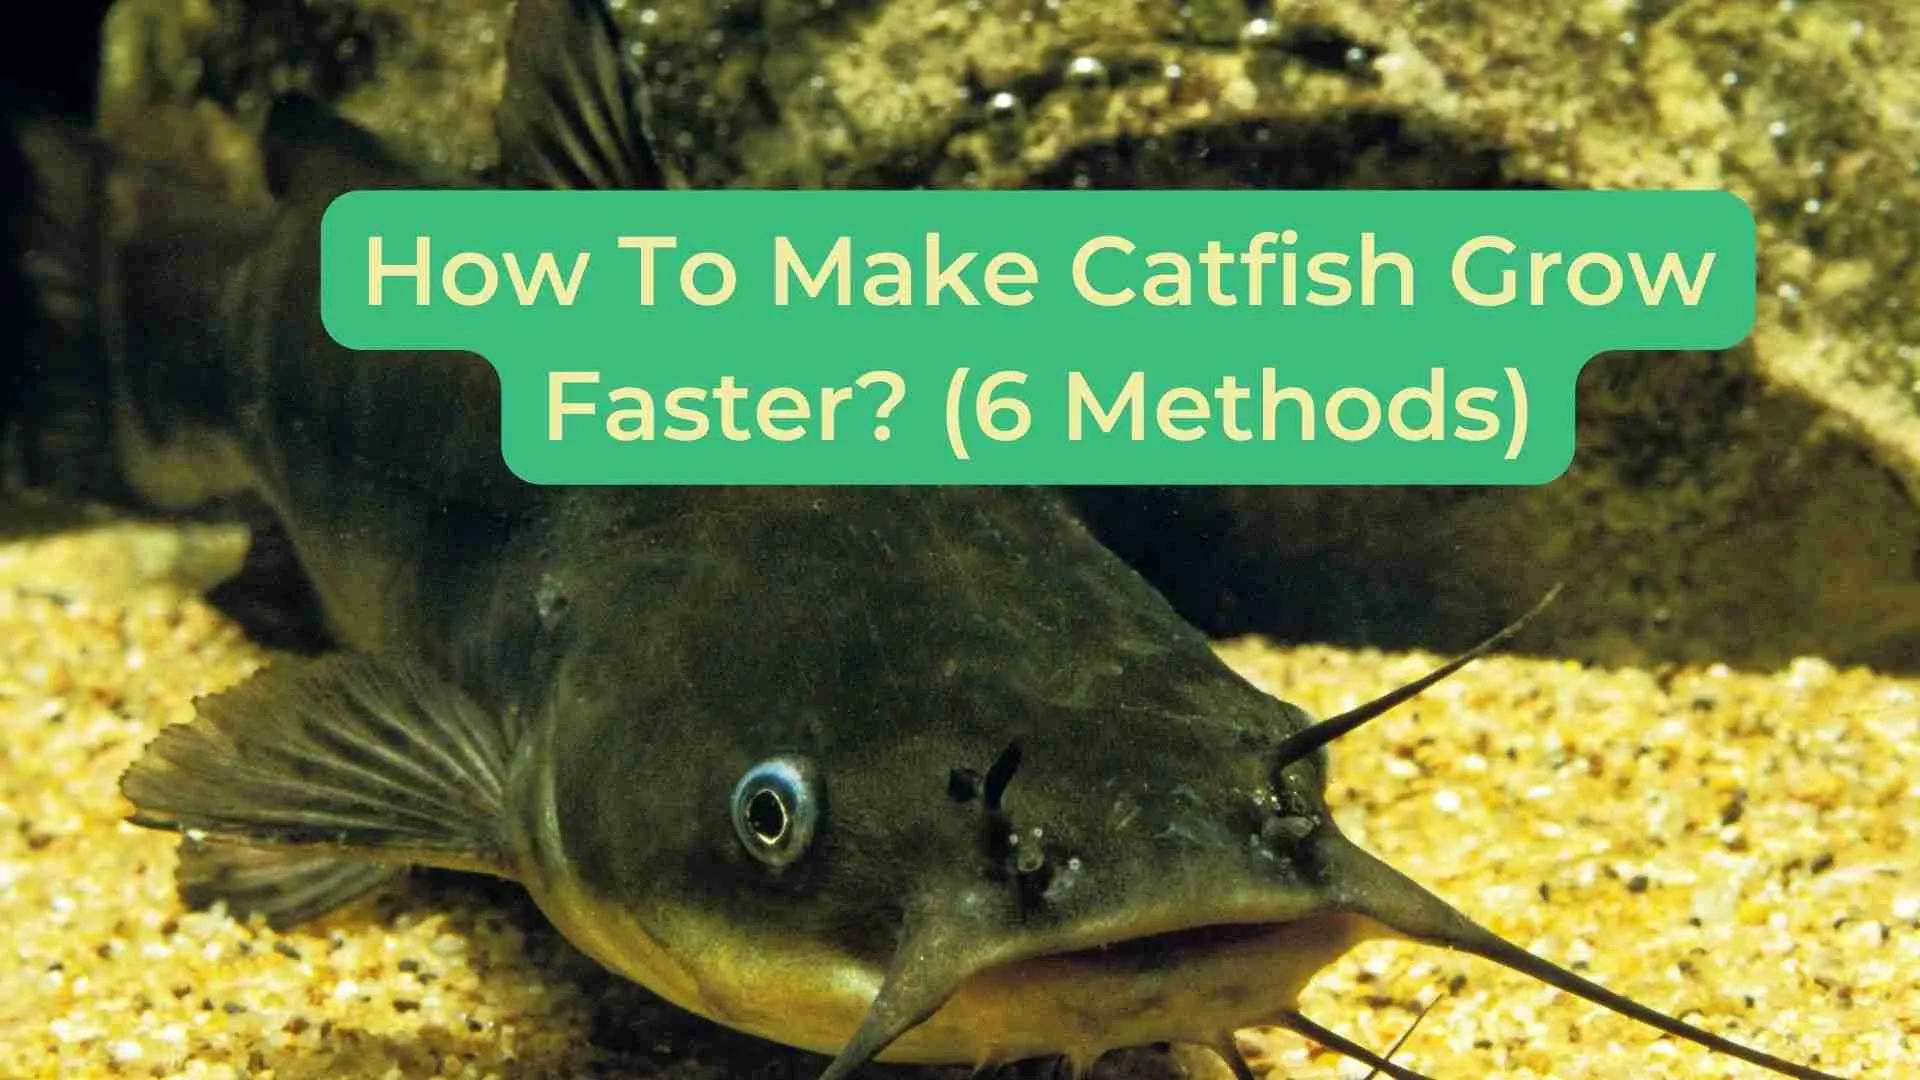 How To Make Catfish Grow Faster